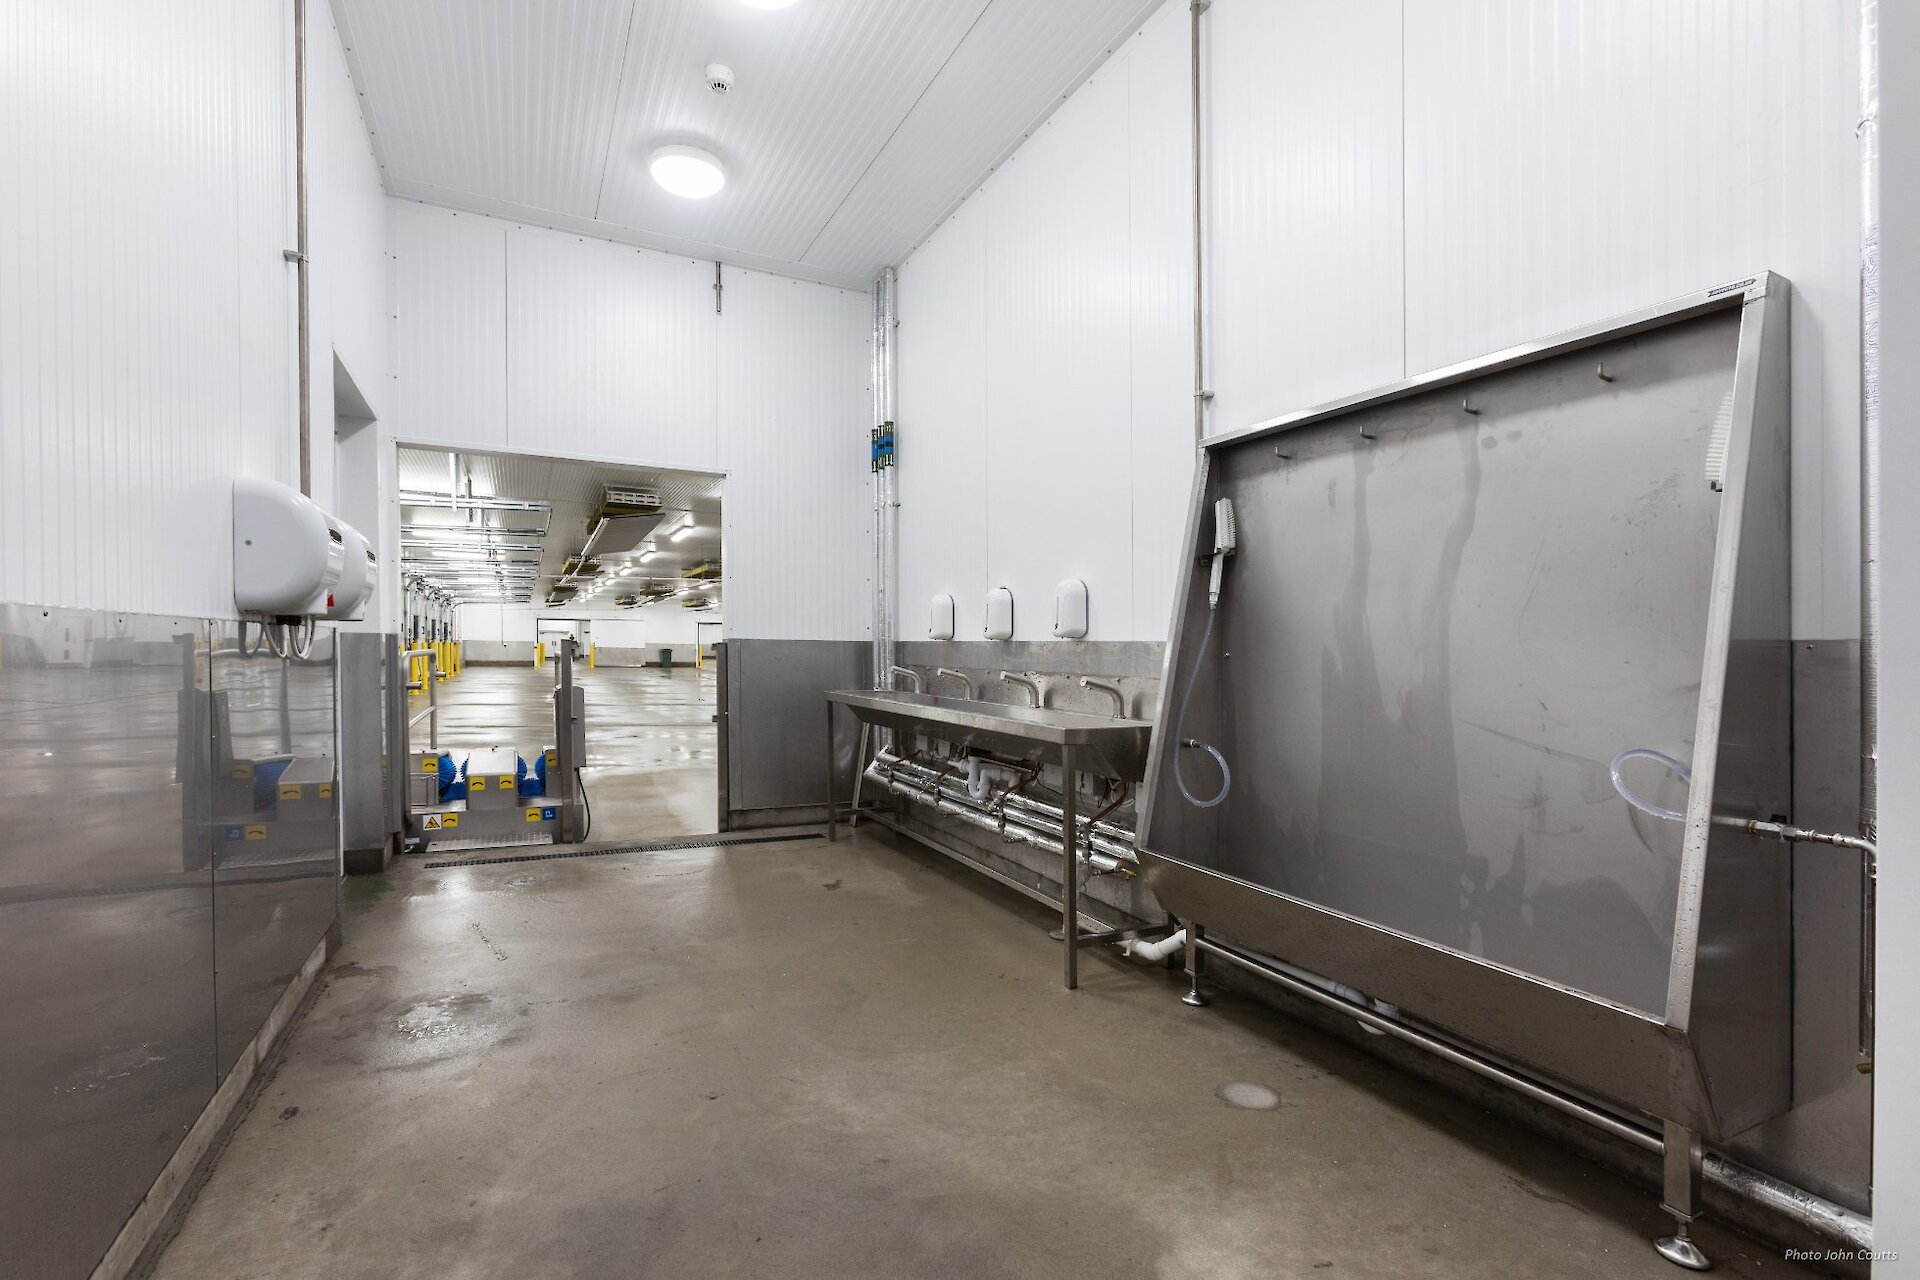 Washing facilities and automated boot wash to improve hygiene